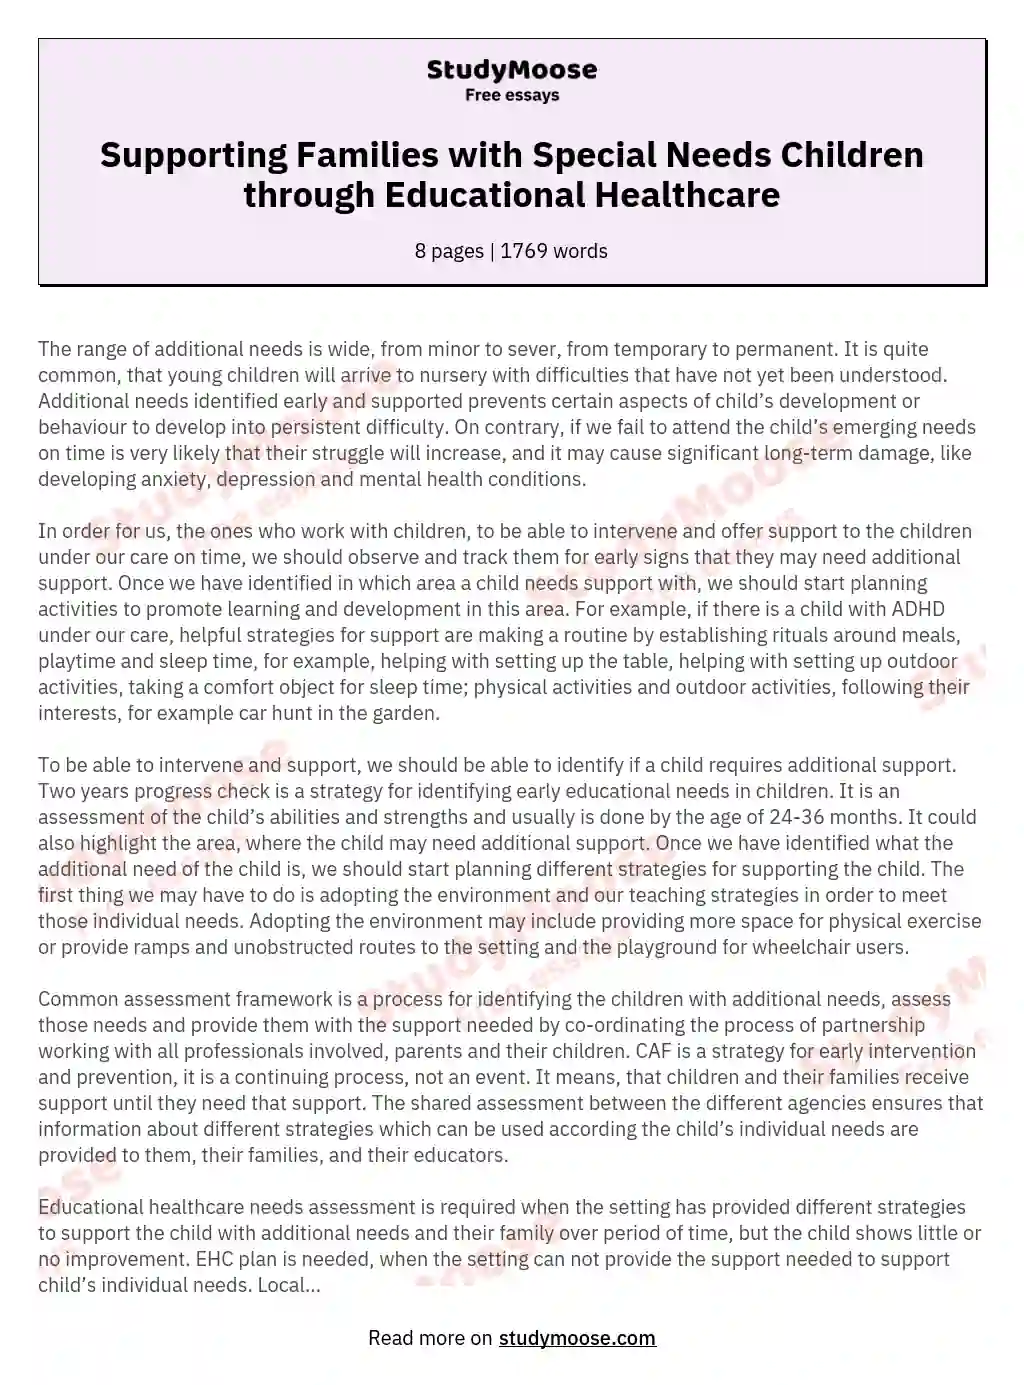 Supporting Families with Special Needs Children through Educational Healthcare essay